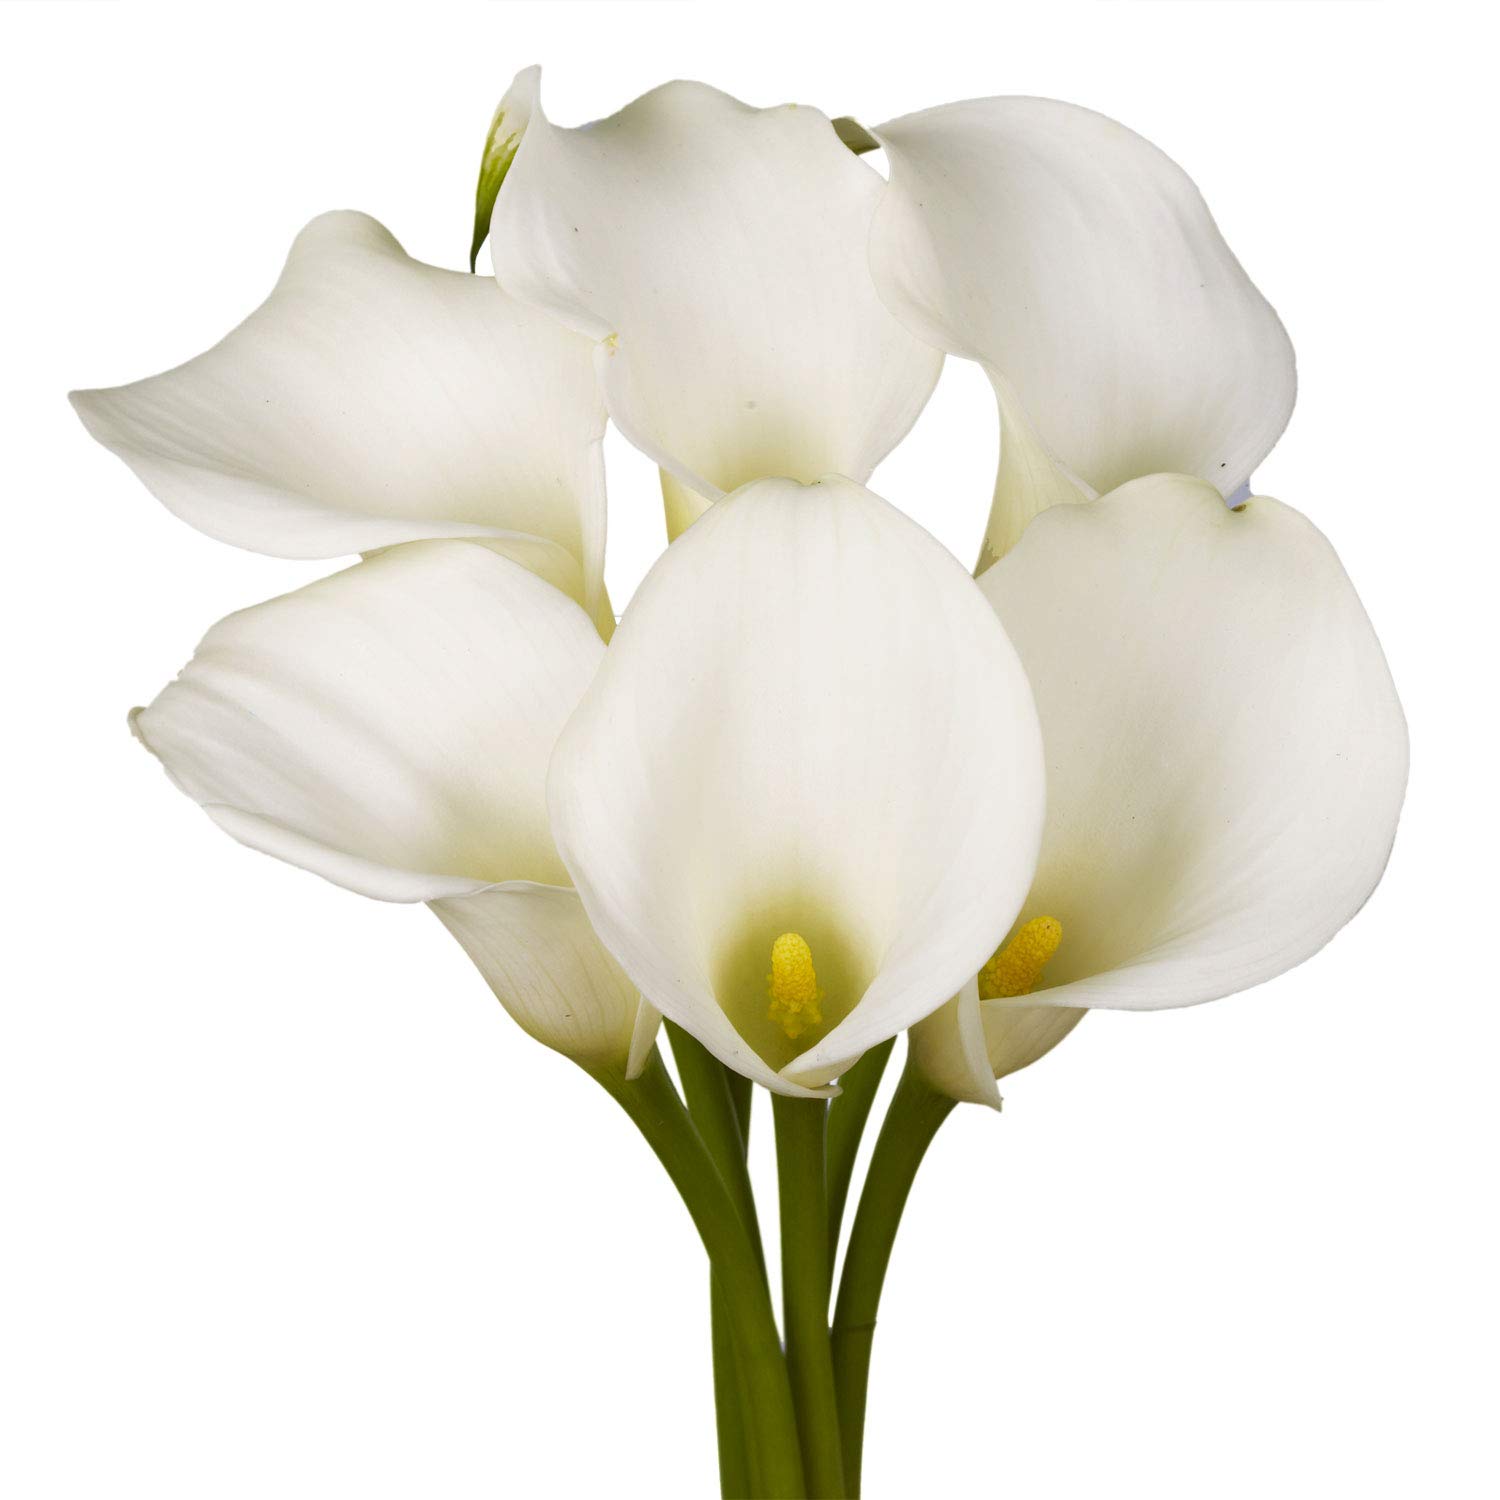 GlobalRose 10 Stems of White Calla Lilies - Fresh Flowers for Delivery